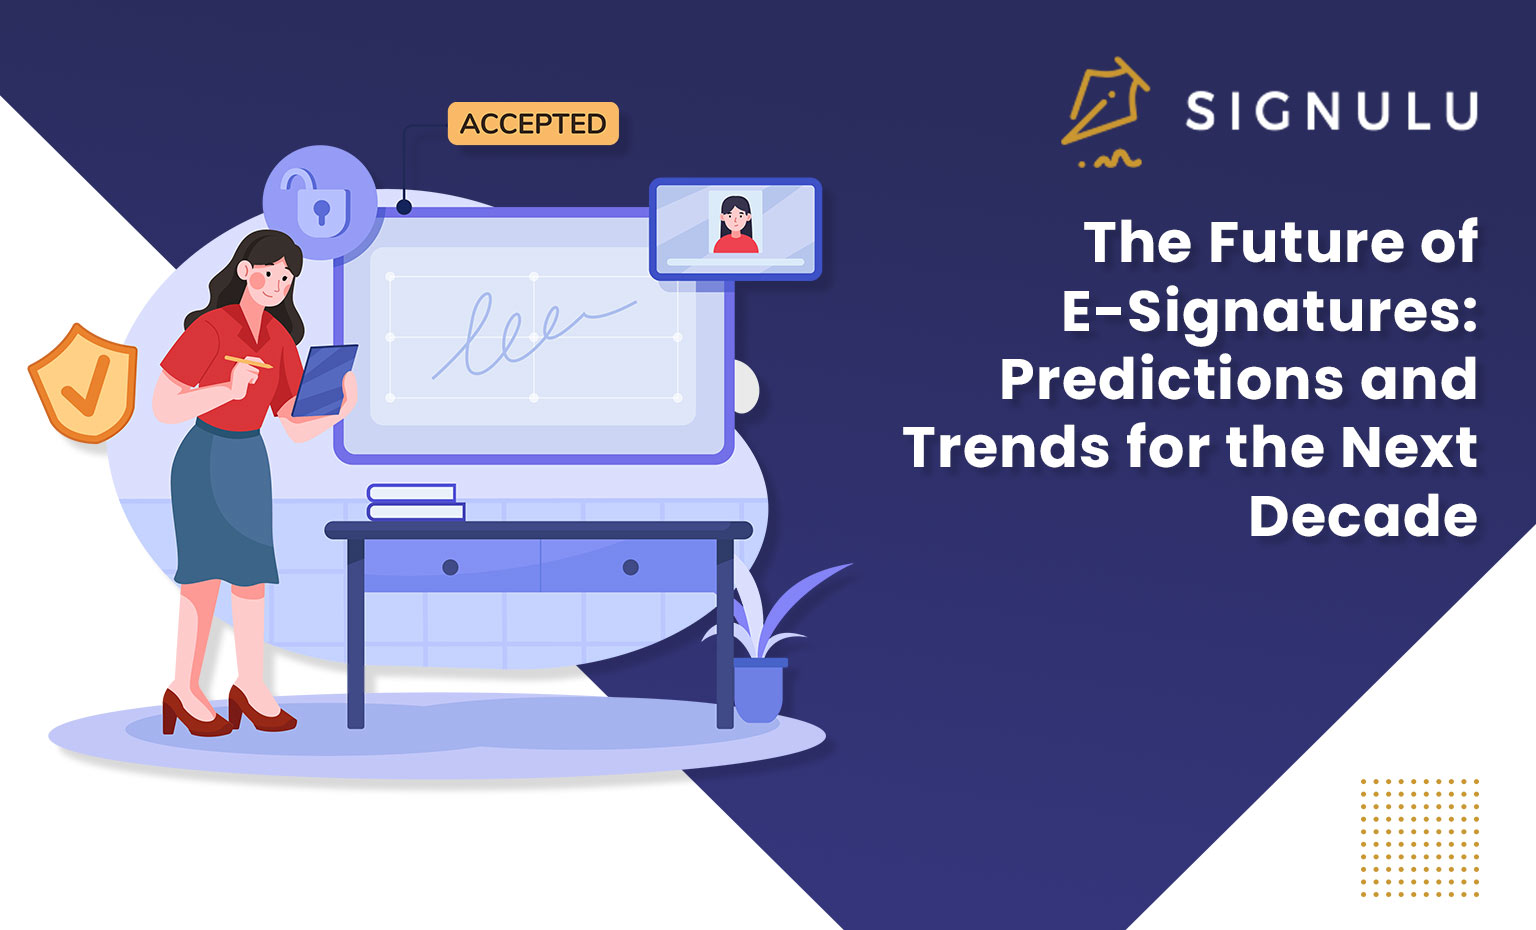 The Future of E-Signatures: Predictions and Trends for the Next Decade